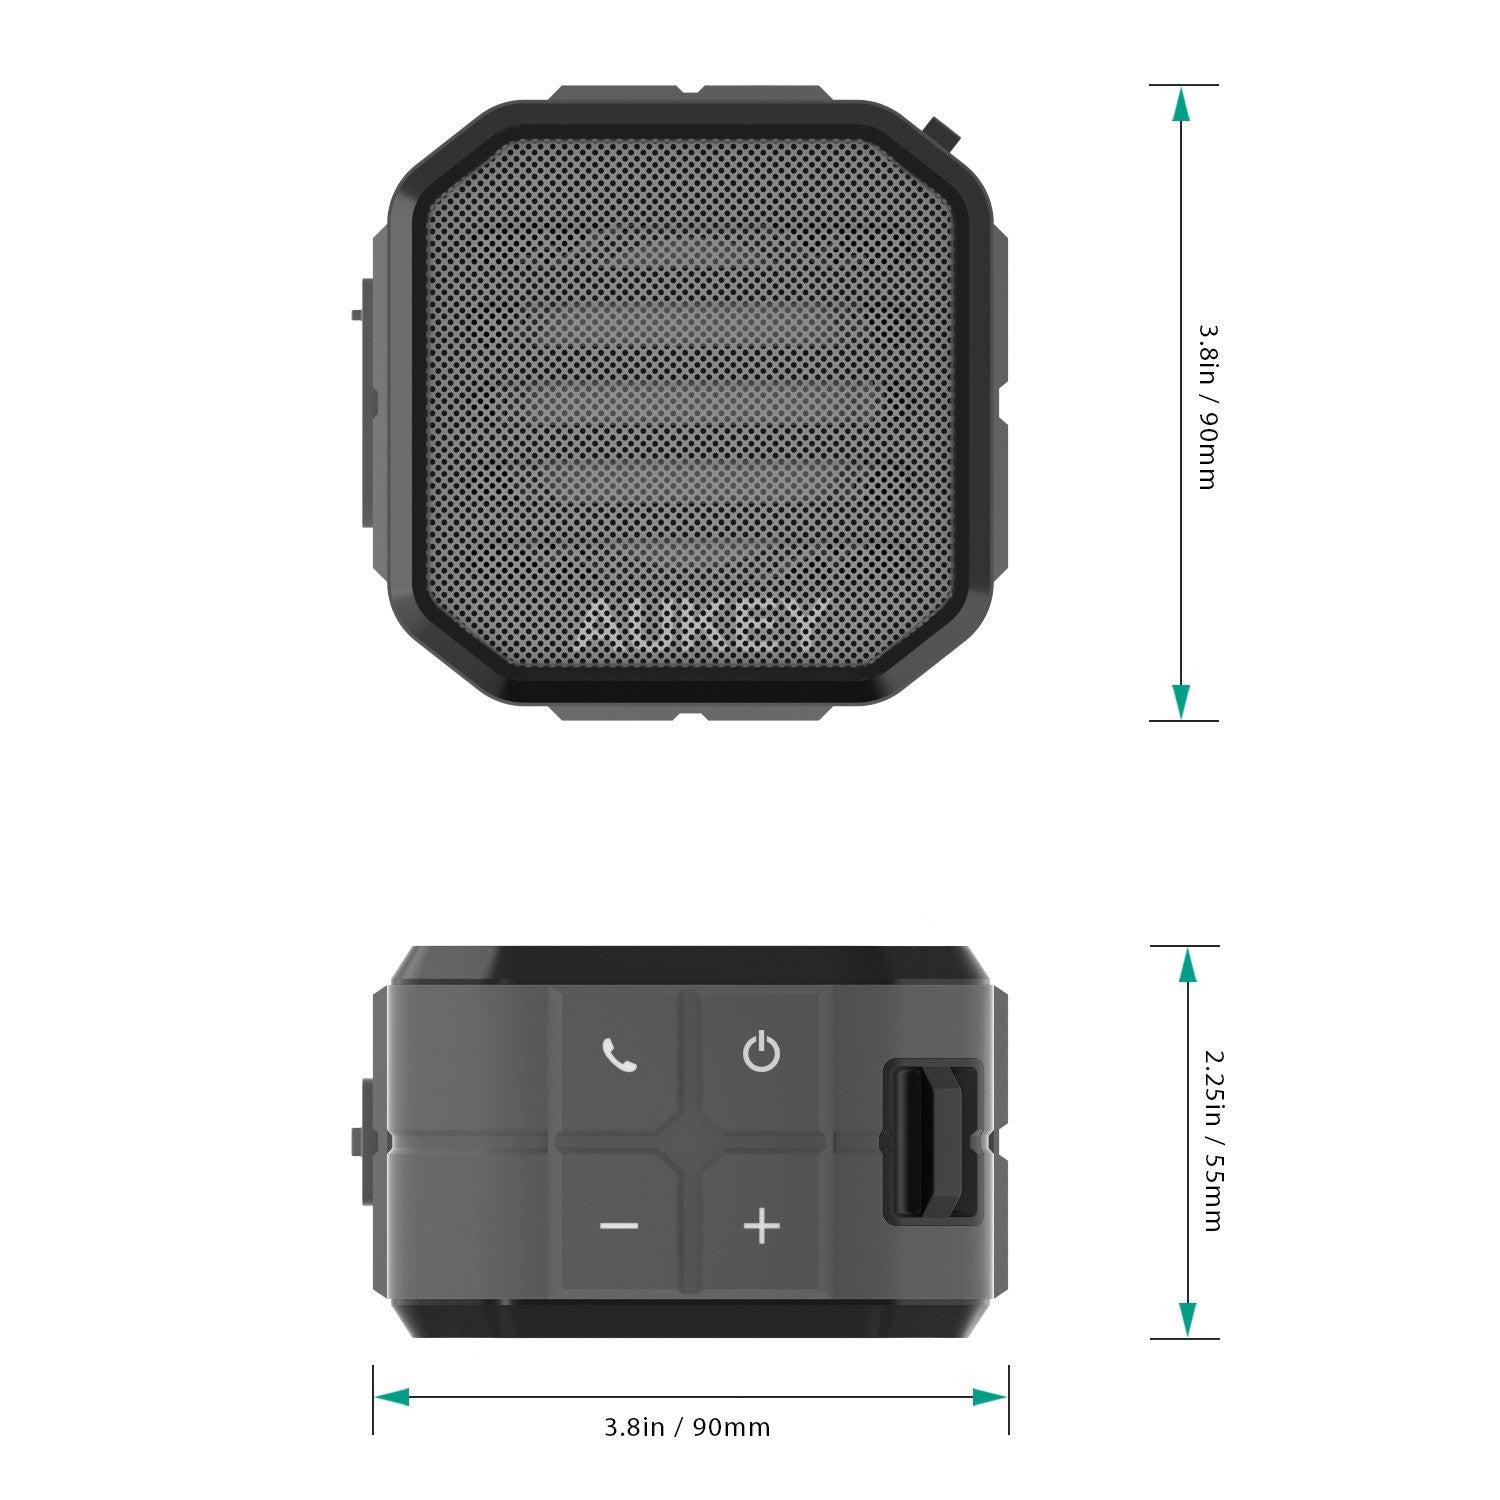 AUKEY SK-M13 Portable outdoor wireless bluetooth speaker with enhance bass - Aukey Malaysia Official Store